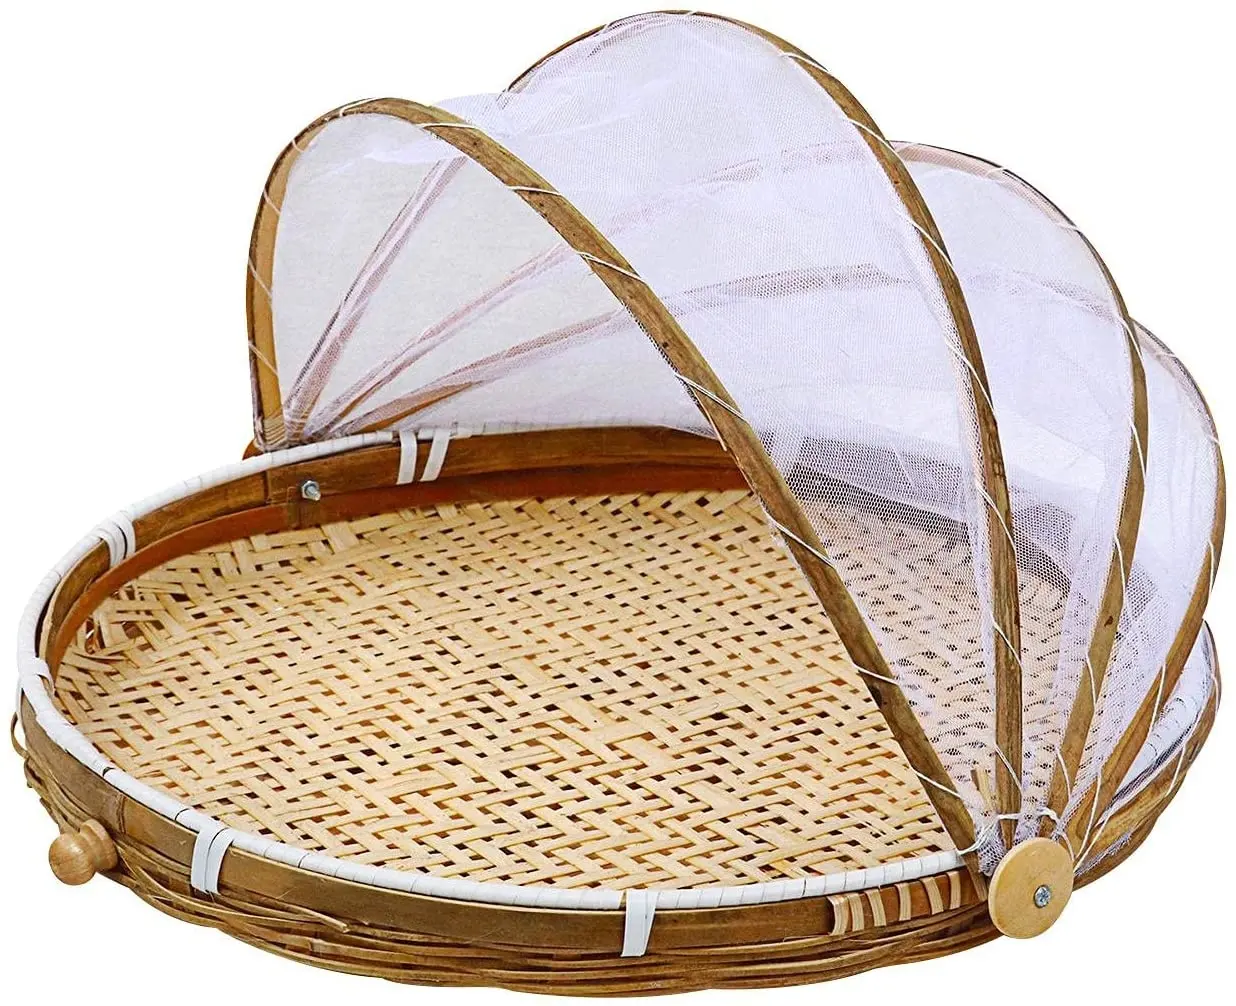 Hand-Woven Food Serving Basket with Gauze - Bug-Proof Dustproof Round Picnic Basket Food Tent Cover Storage Container for Home